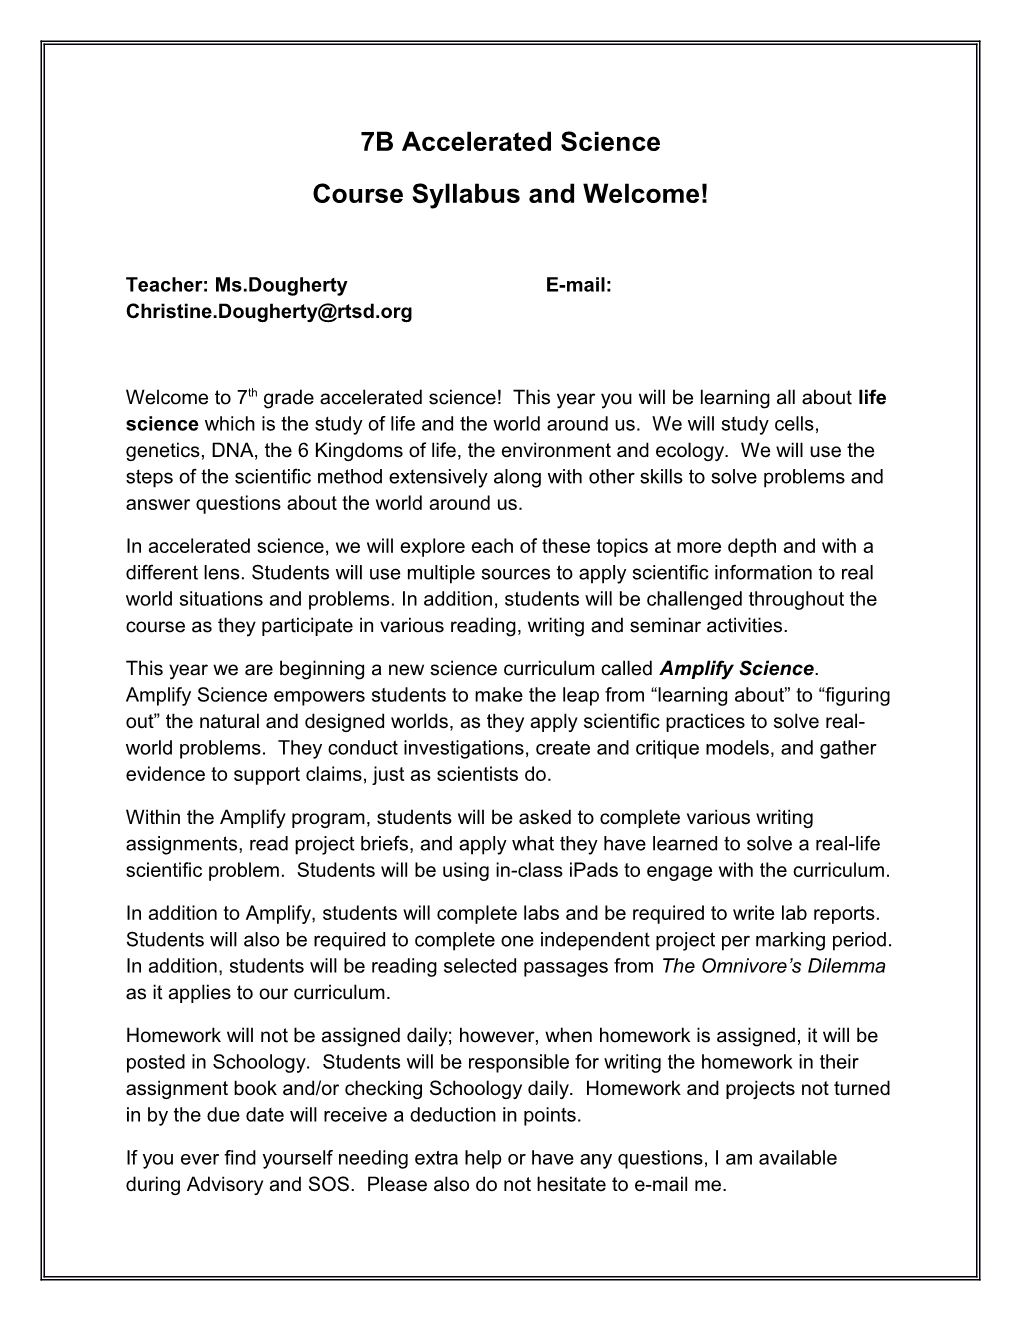 Course Syllabus and Welcome!